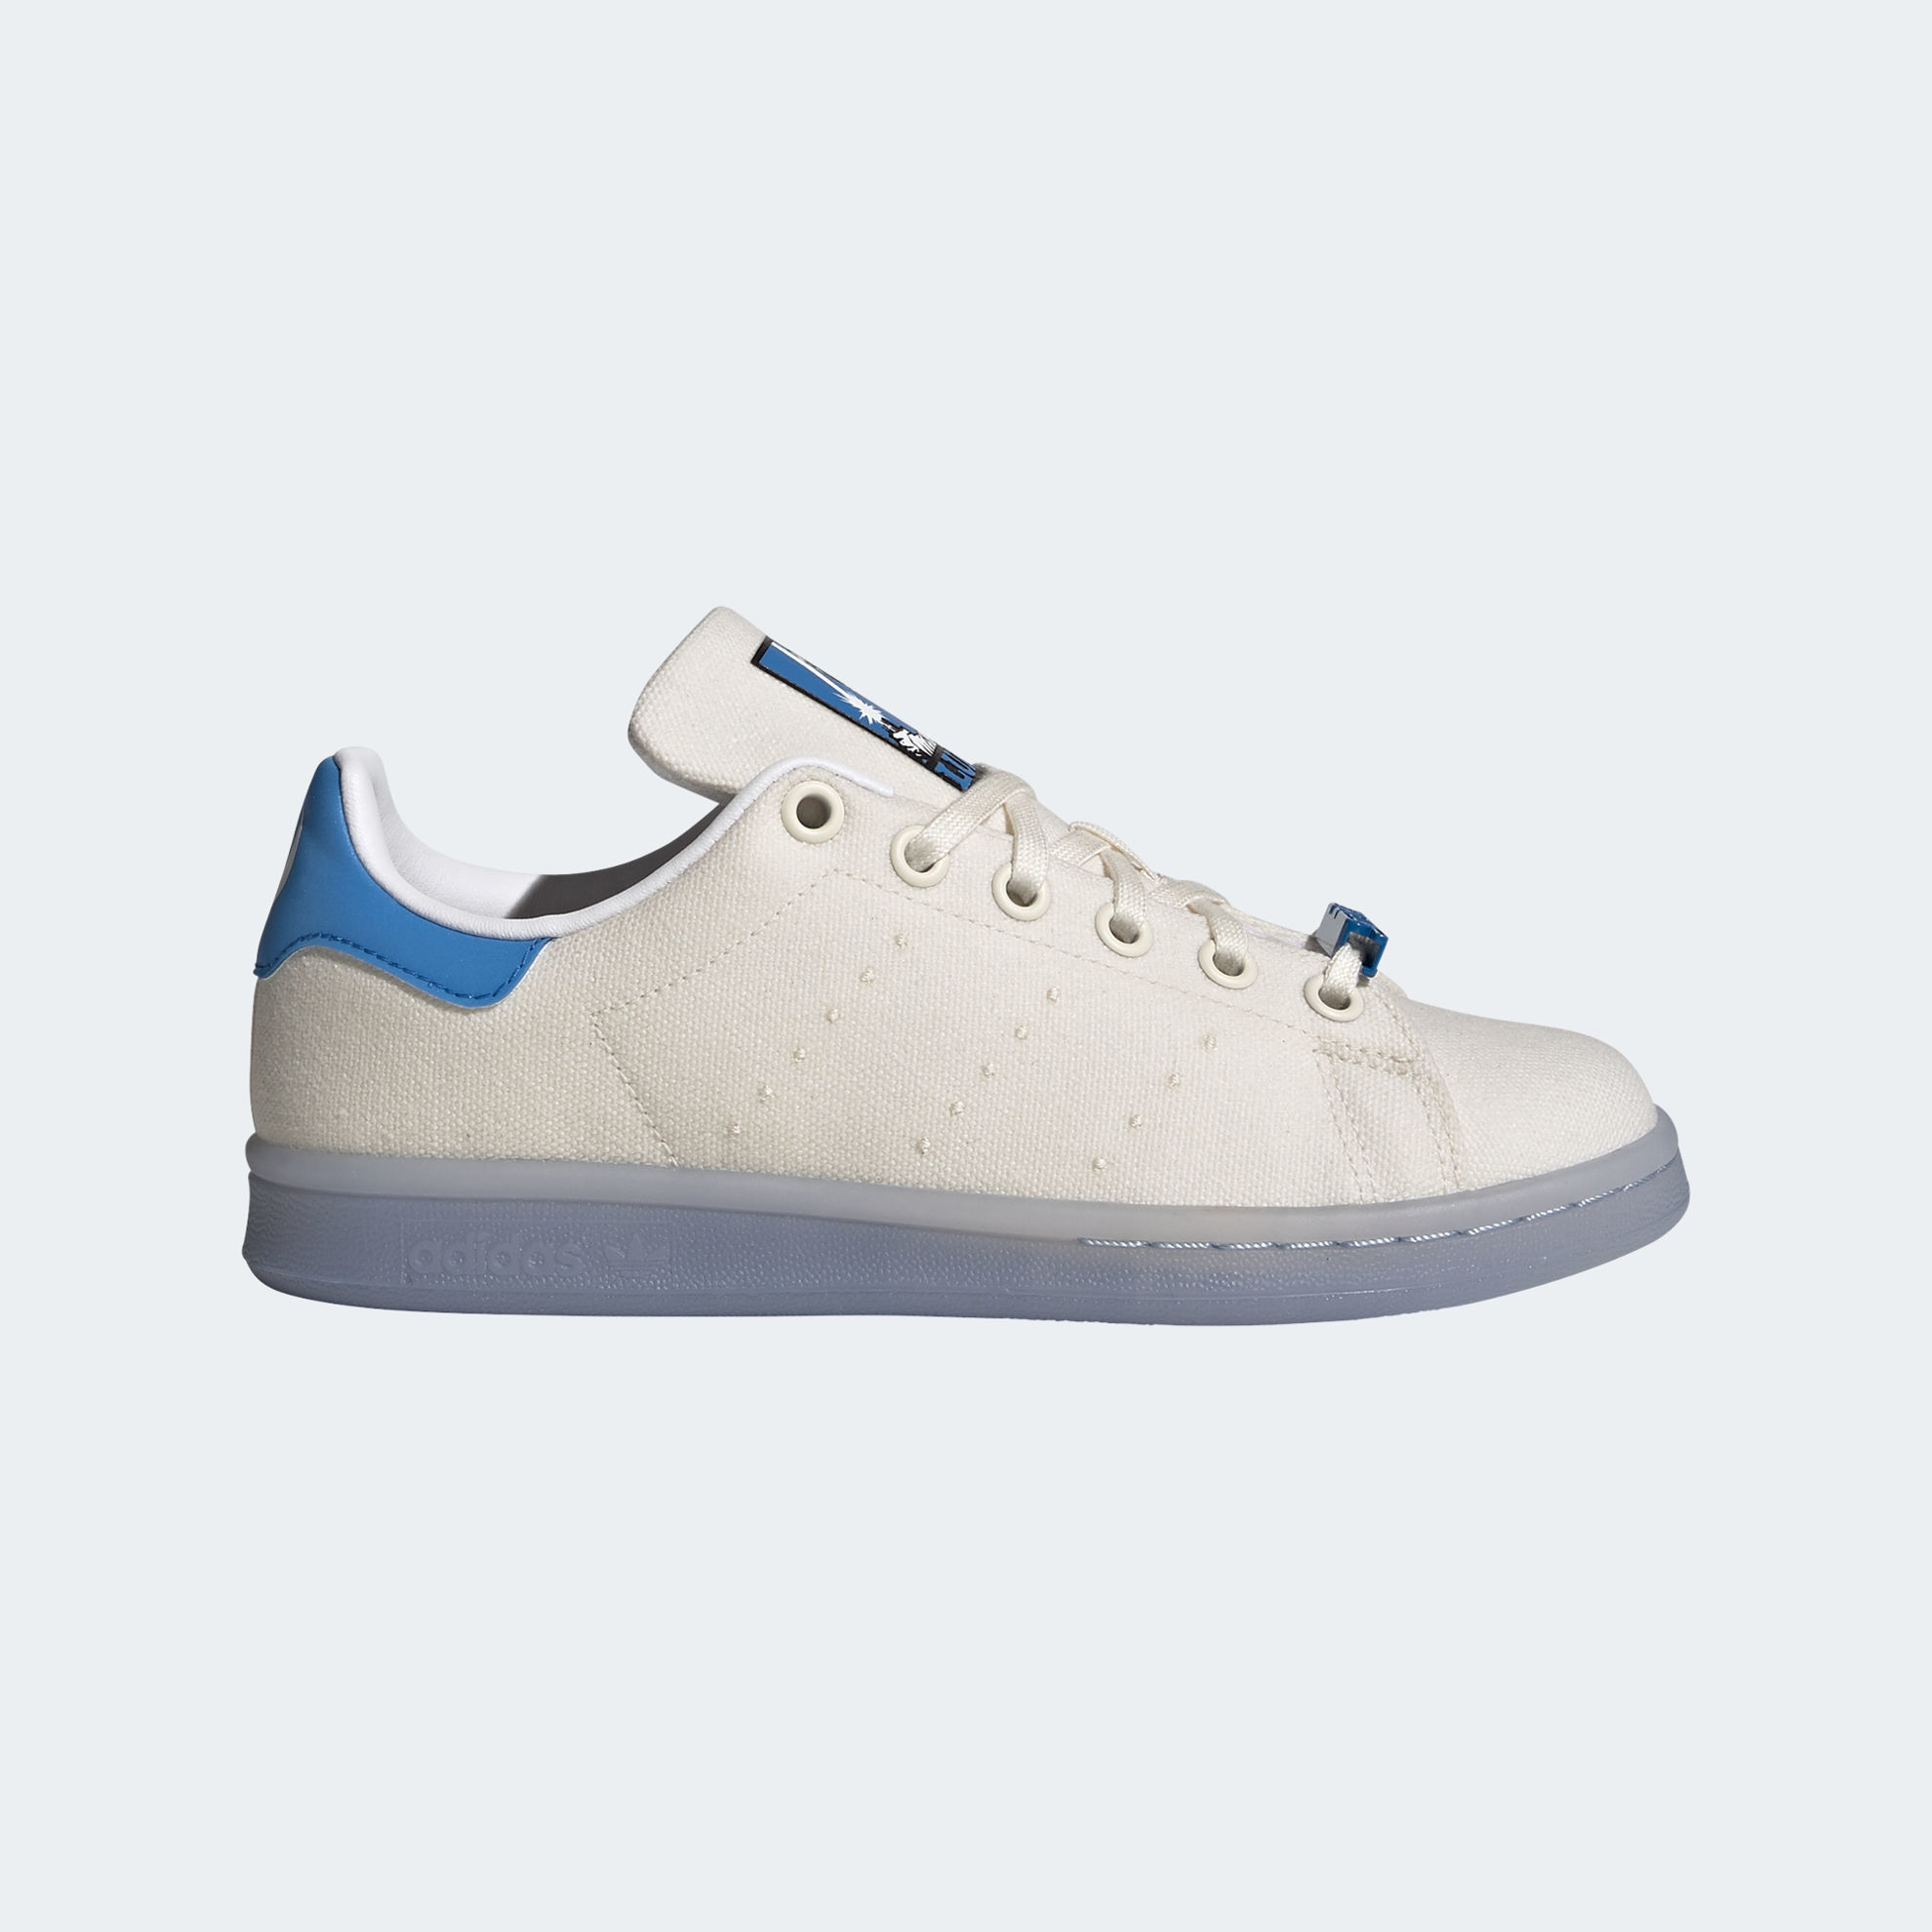 Stan Smith Star Wars Shoes | adidas Official Website